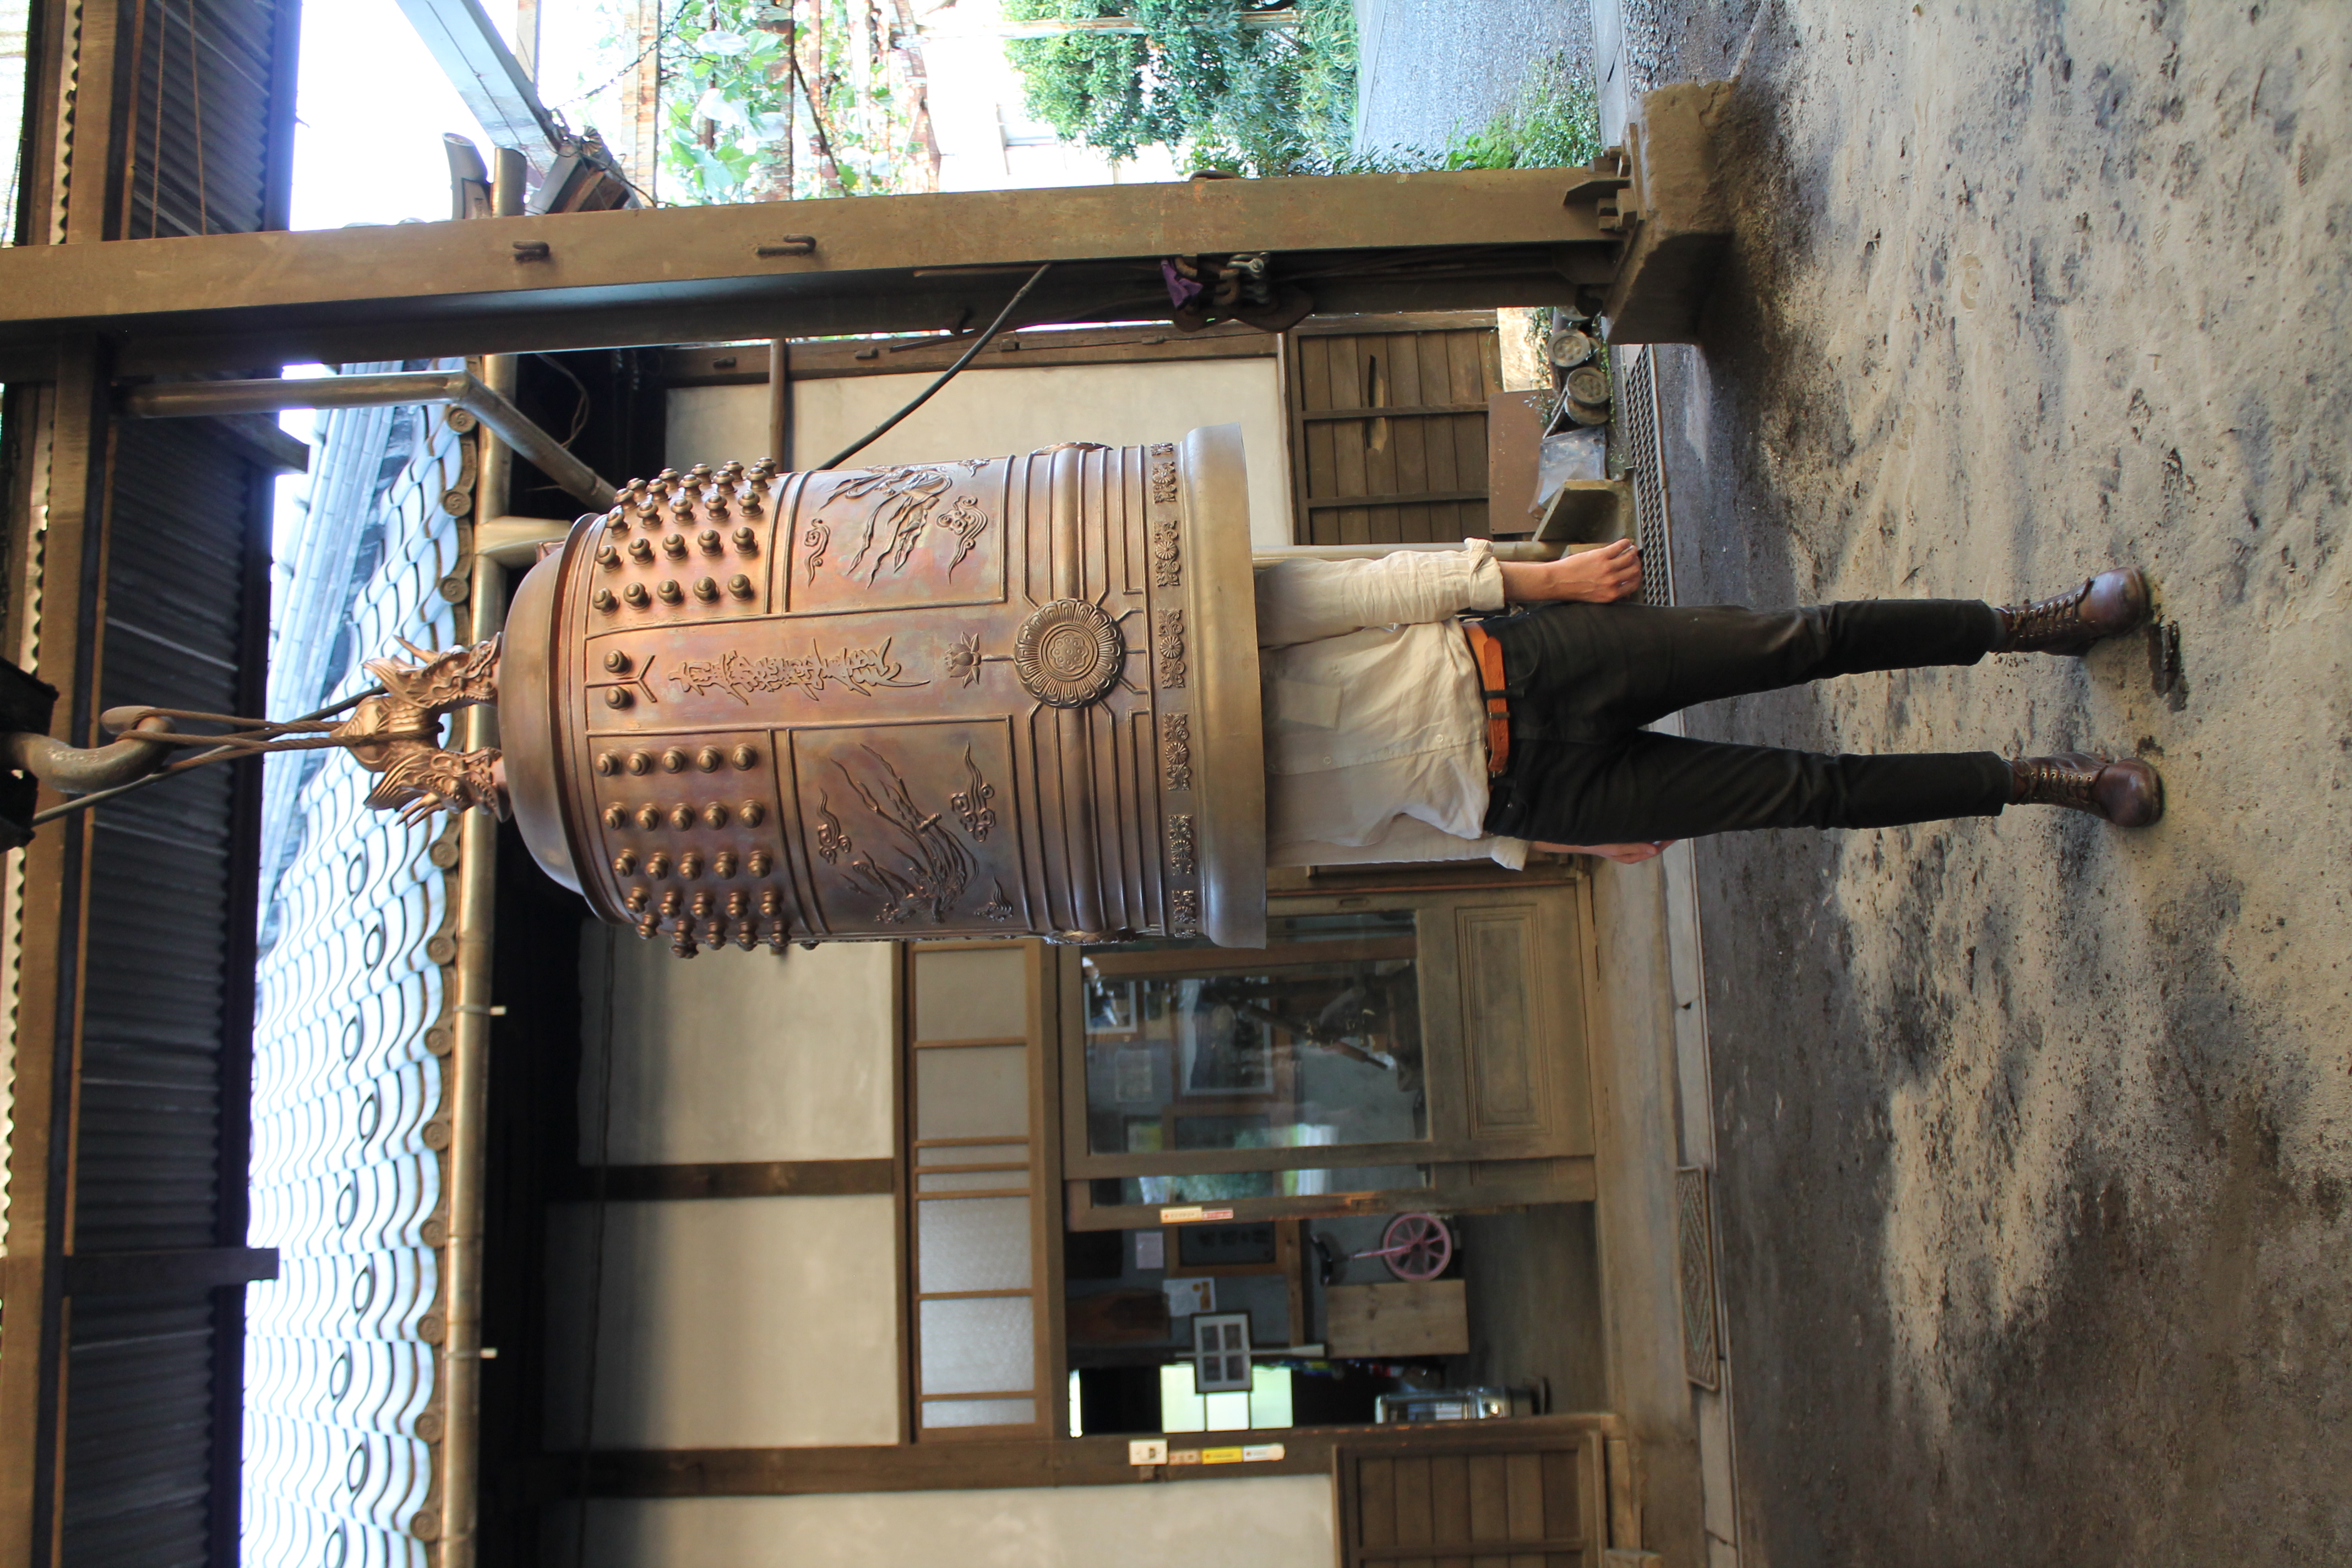 Tamm listening to bonsho in Kotabe-san’s foundry, photograph courtesy of Arcus Project, 2017